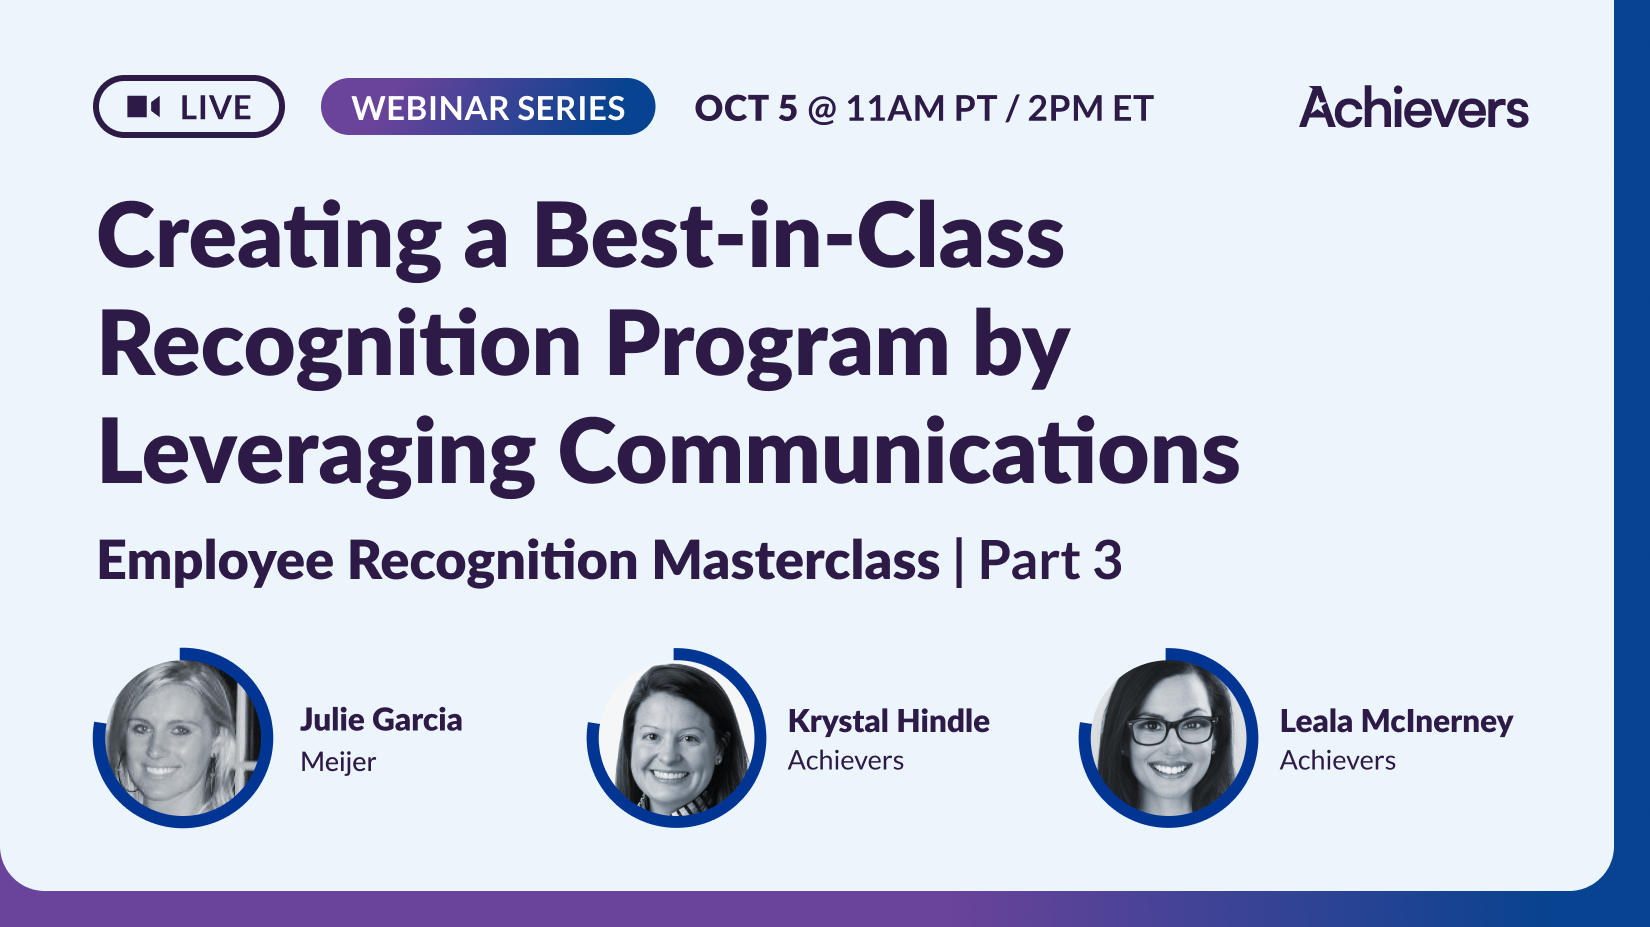 Creating a Best-in-Class Recognition Program by Leveraging Communications